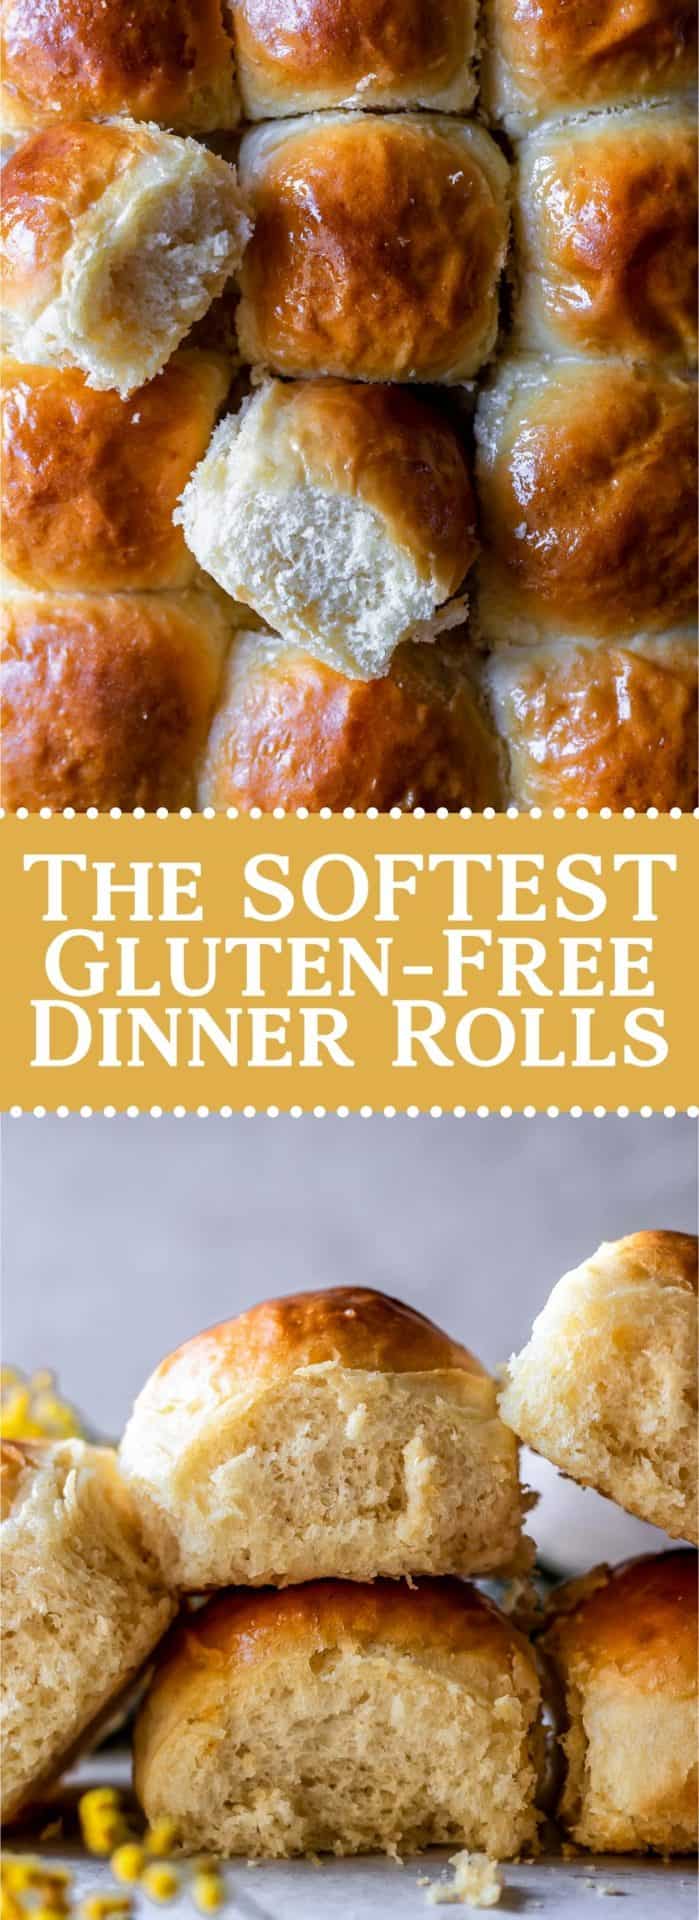 These Gluten-Free Dinner Rolls are tender, buttery, fluffy, flaky on the top and extra soft in the center!